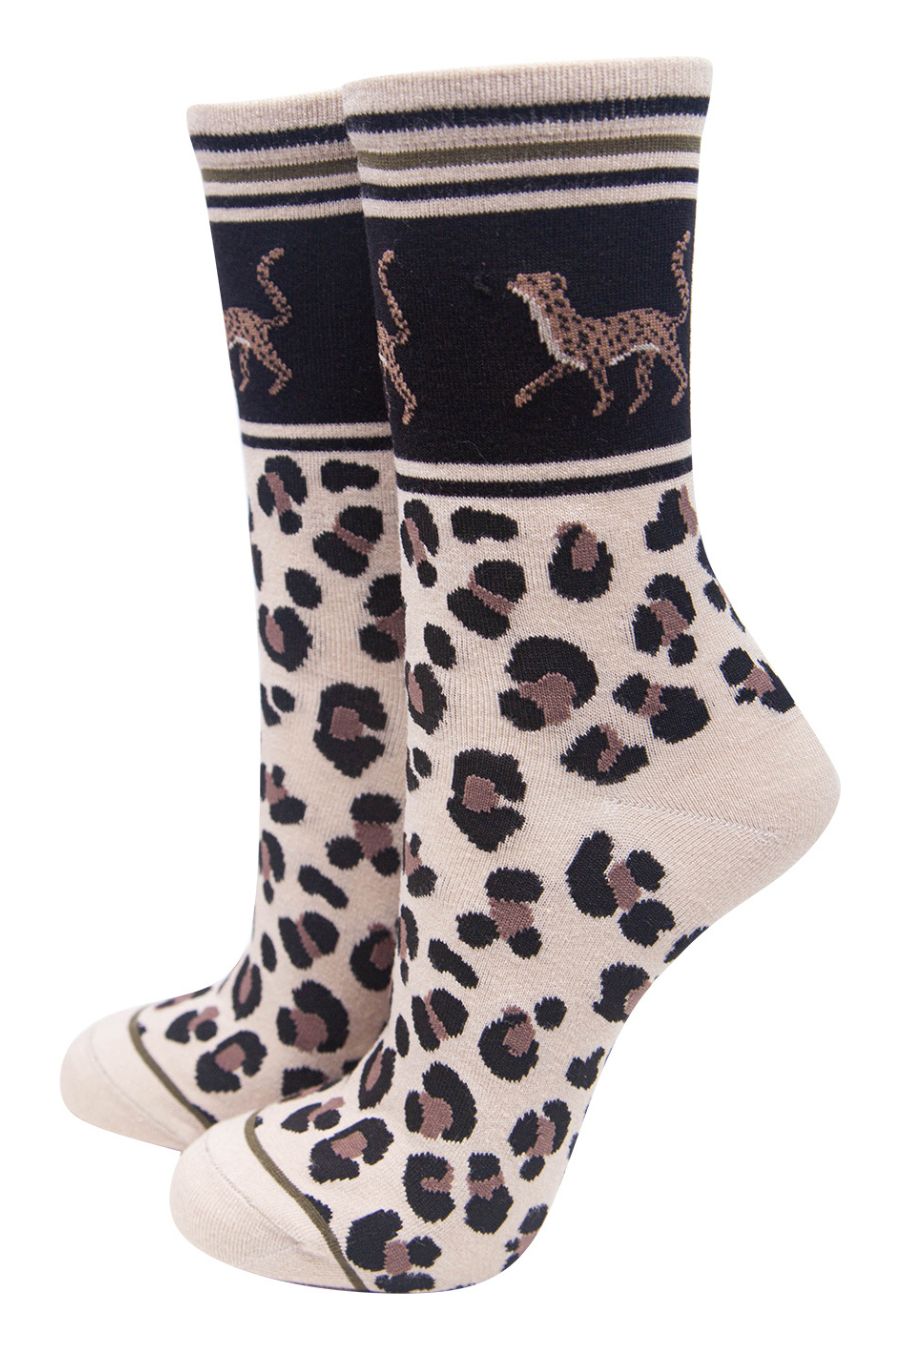 cream ankle socks with a neutral animal print and cheetah cats around the ankles